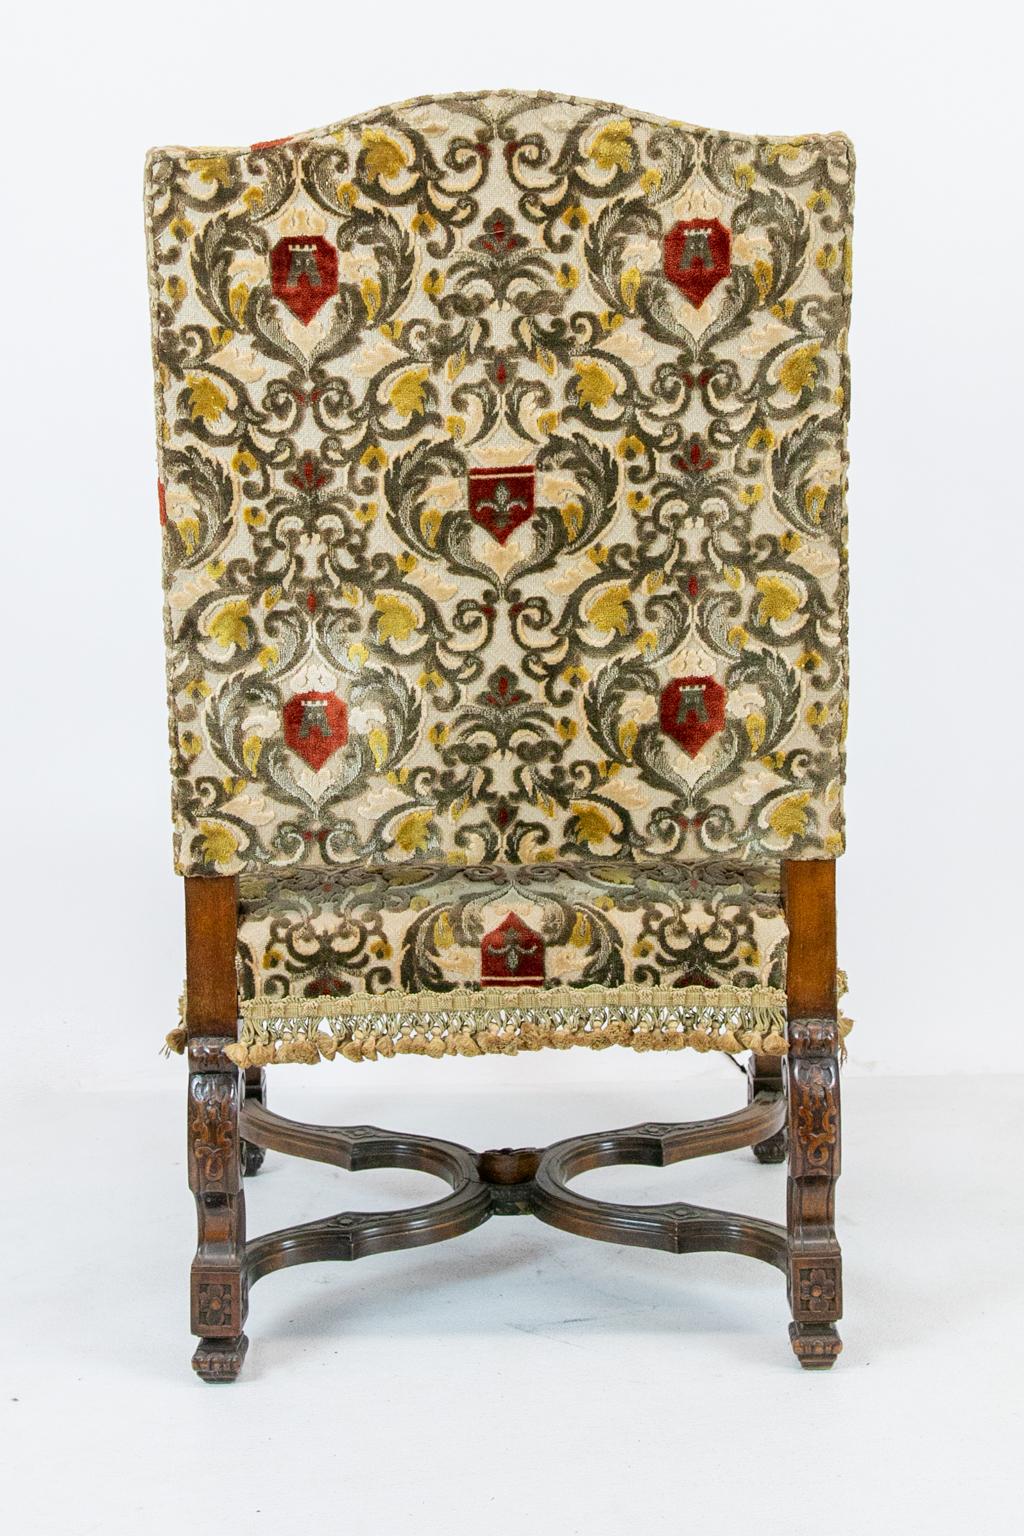 Mahogany English Carved Walnut Upholstered Crewel Work Armchair For Sale 5